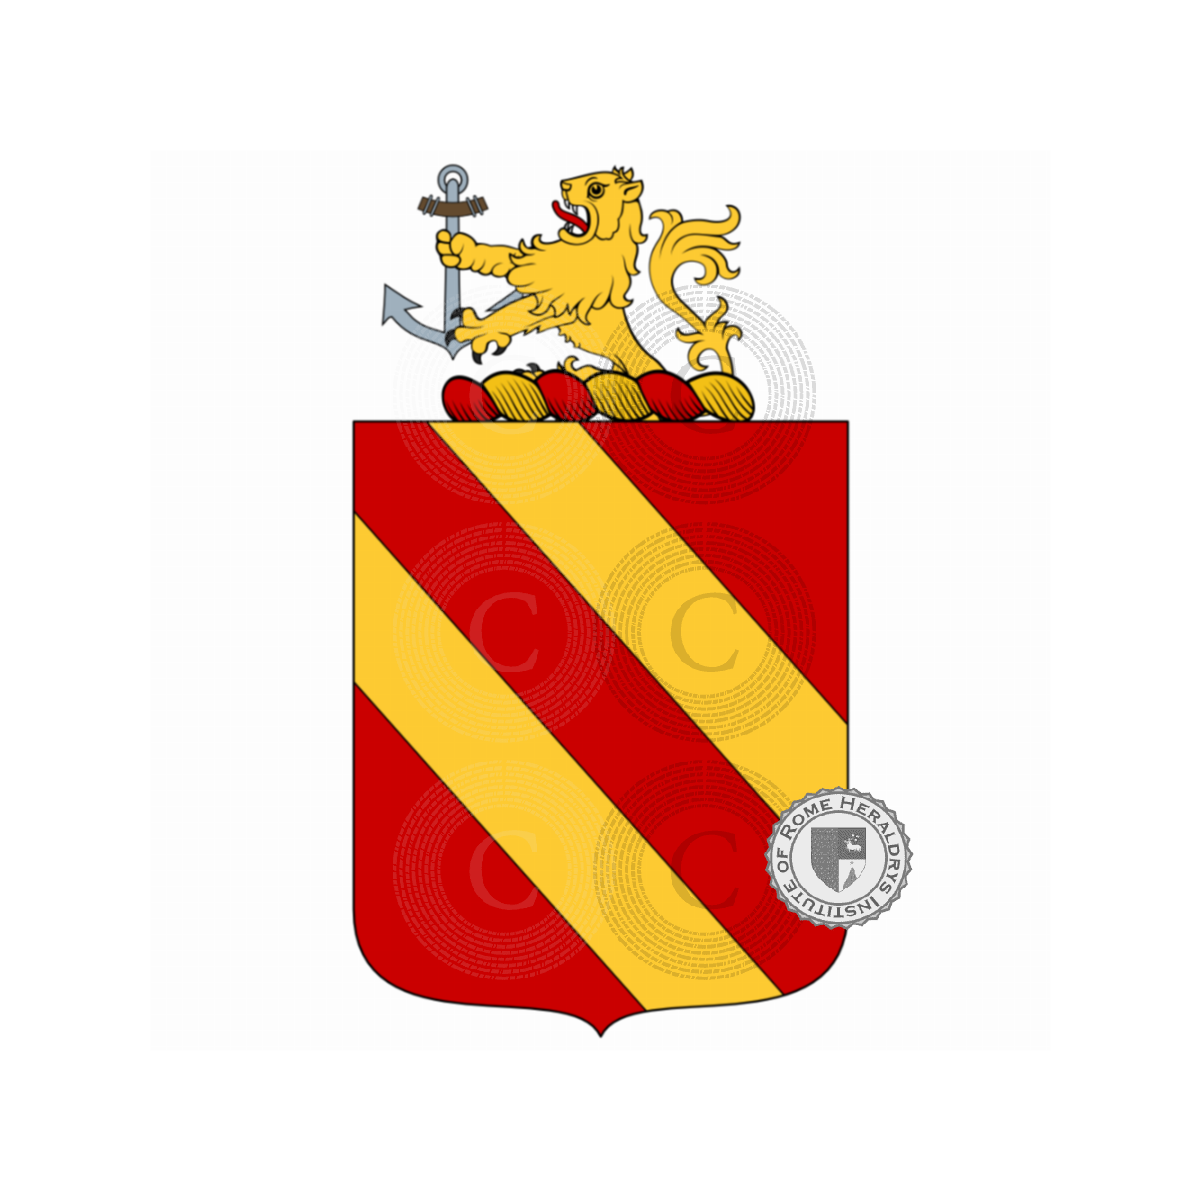 Coat of arms of familyMiles